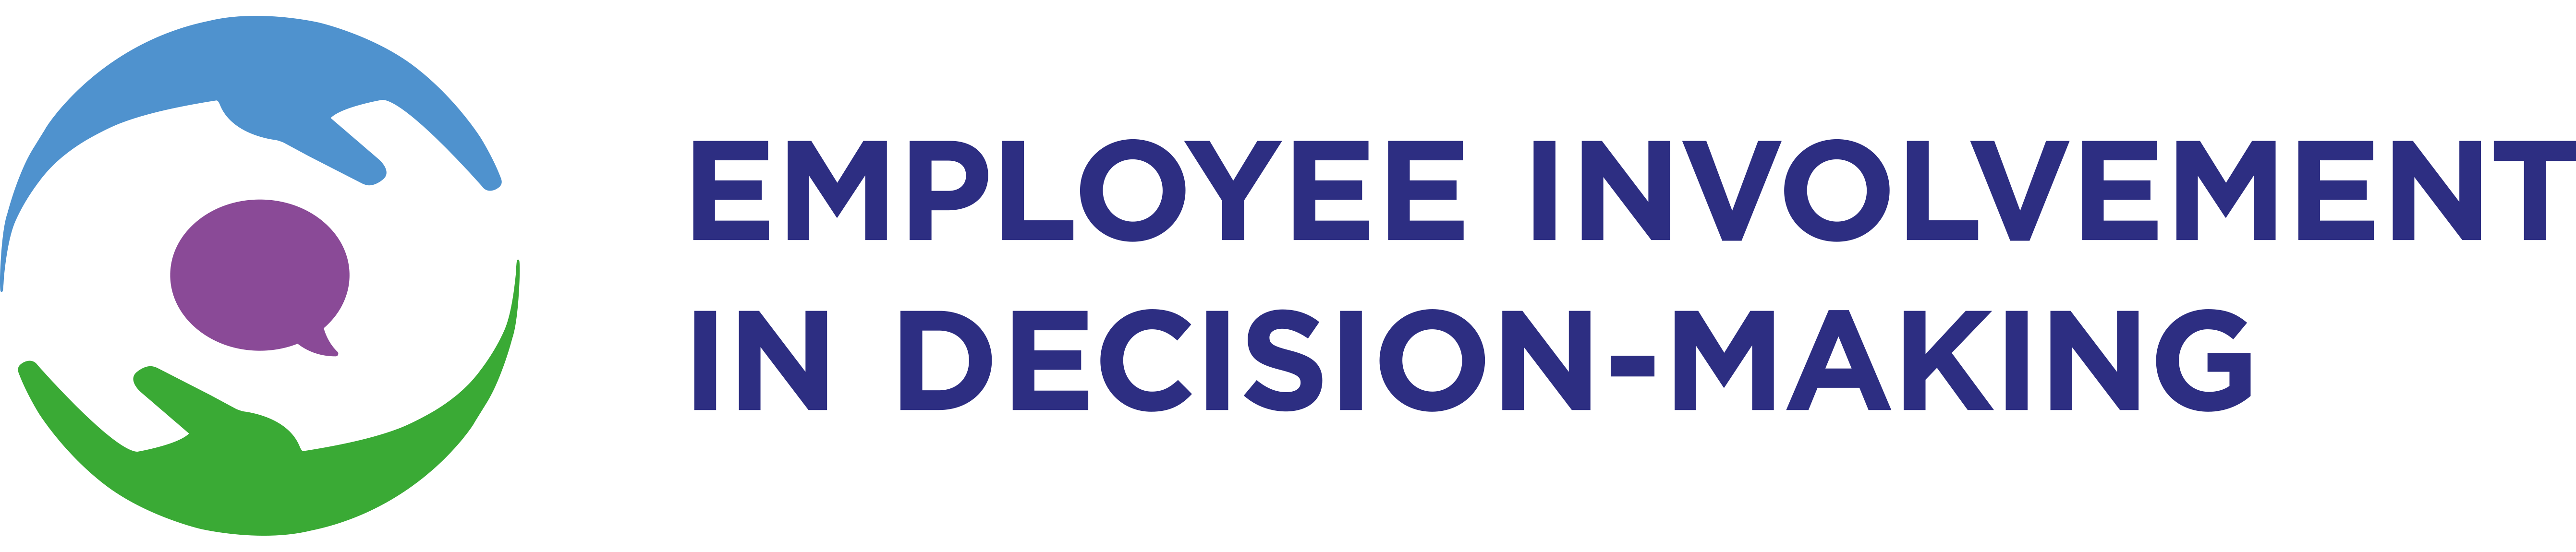 Employees decision making